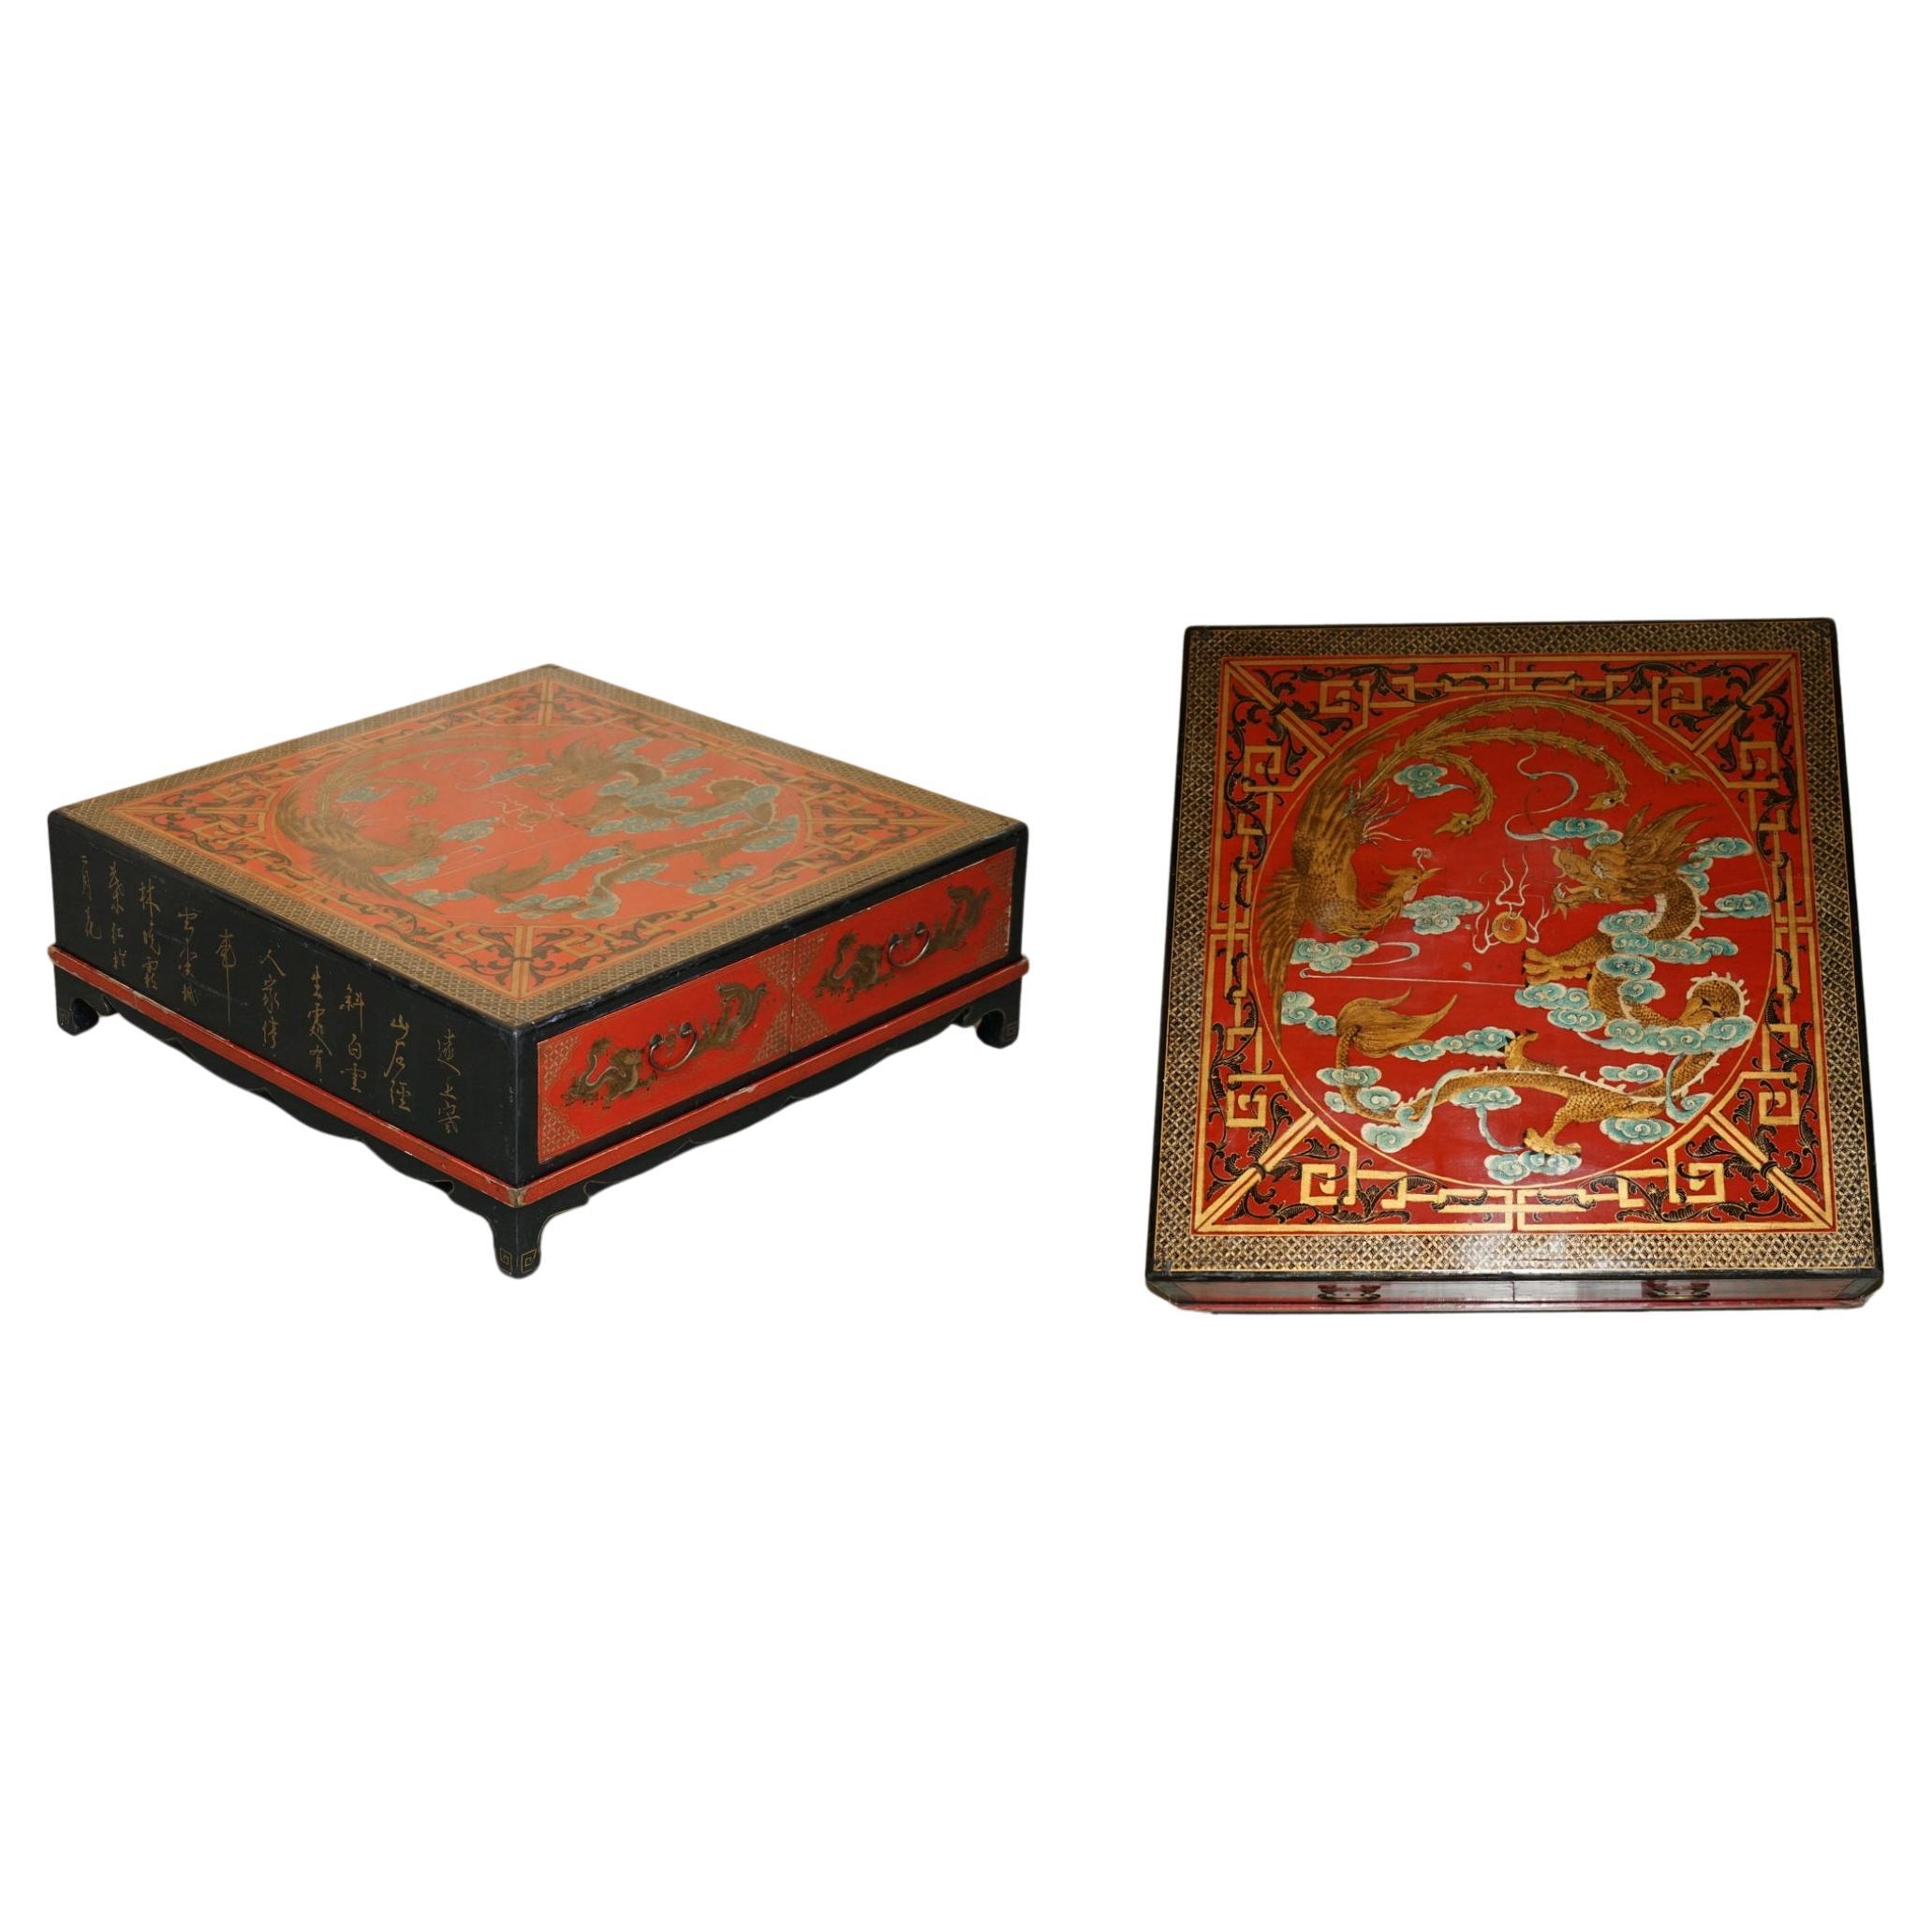 GROSSE ANTIQUE CIRCA 1920 CHINESISCHE DRACHE CHINOISERIE EXPORT COFFEE TABLE DRAWERS im Angebot